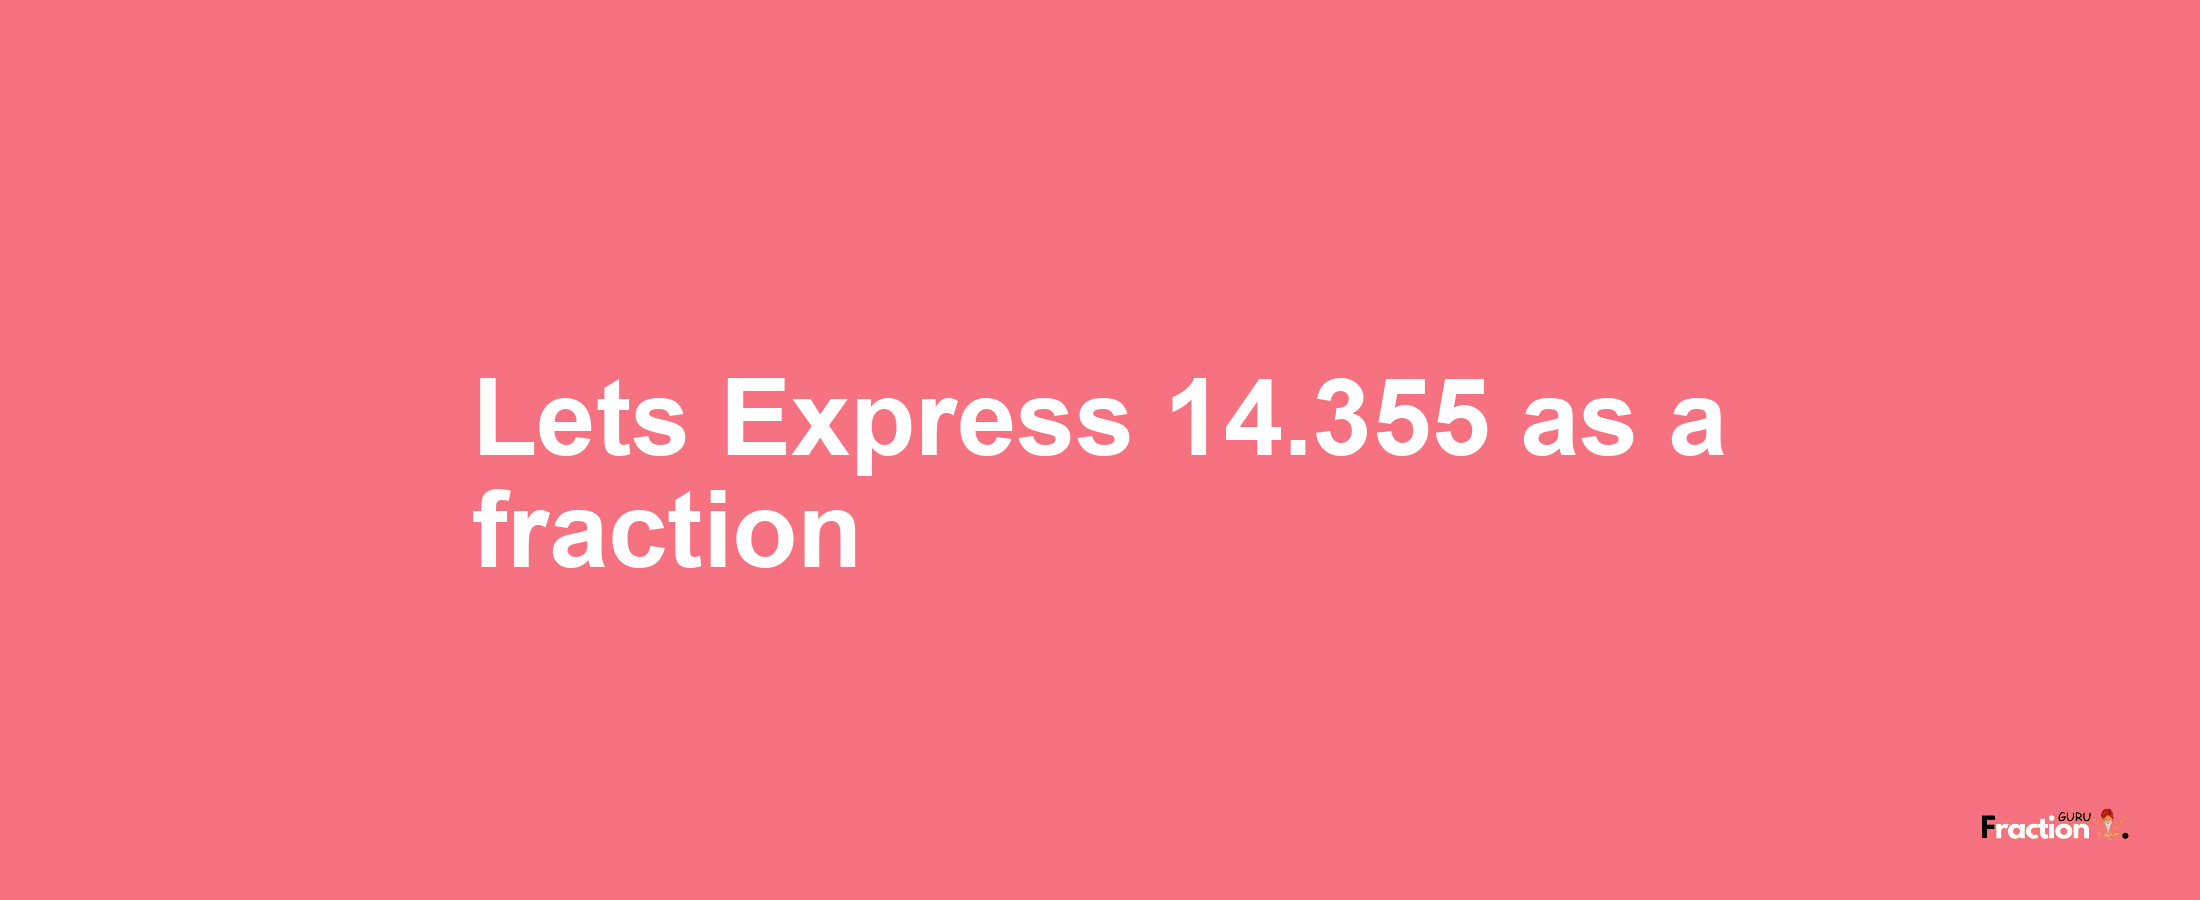 Lets Express 14.355 as afraction